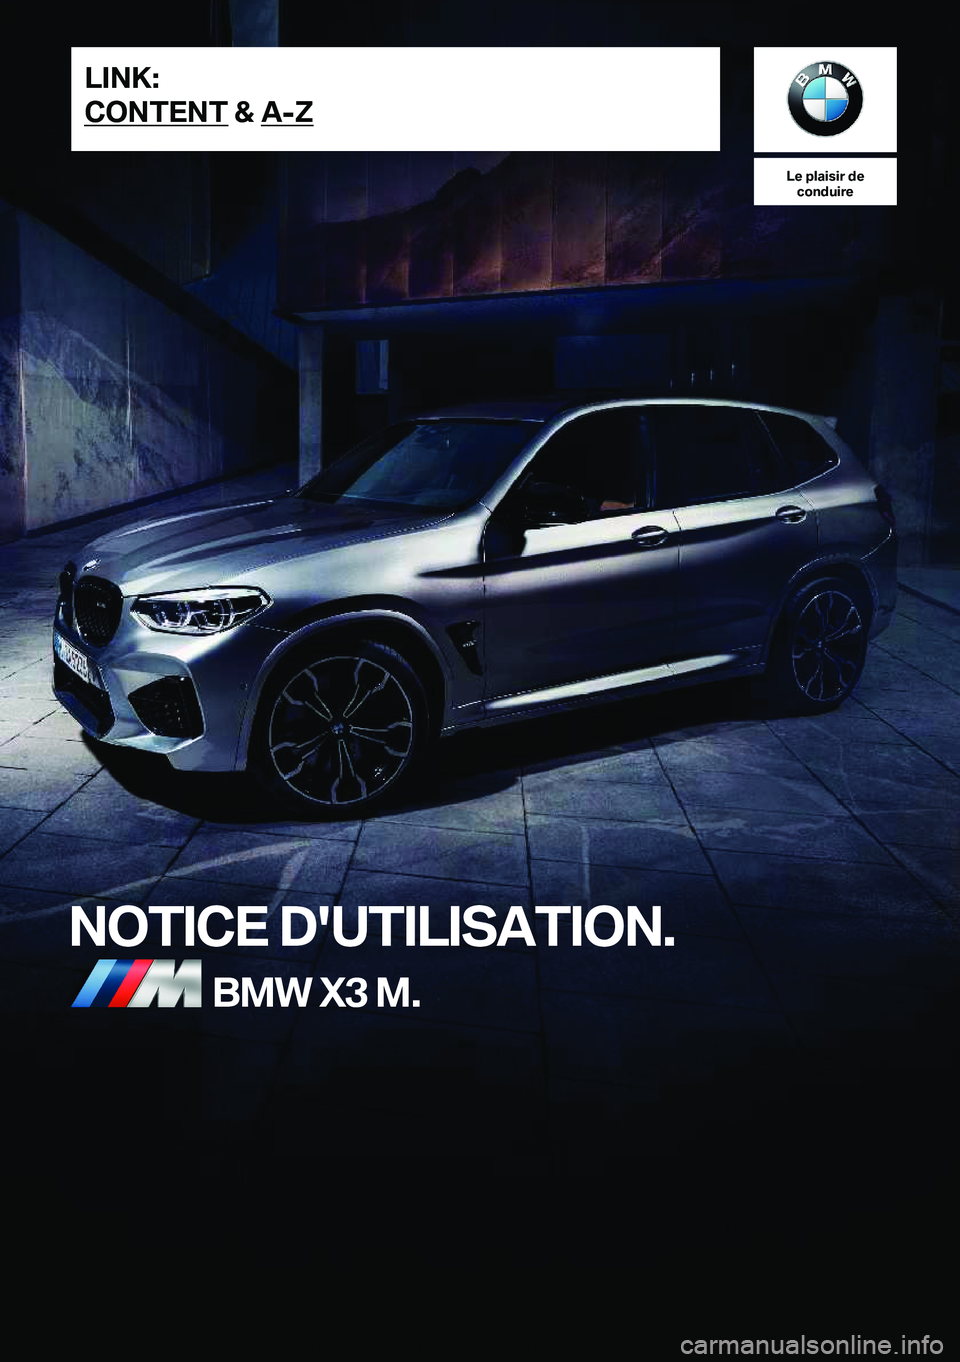 BMW X3 M 2020  Notices Demploi (in French) �L�e��p�l�a�i�s�i�r��d�e�c�o�n�d�u�i�r�e
�N�O�T�I�C�E��D�'�U�T�I�L�I�S�A�T�I�O�N�.�B�M�W��X�3��M�.�L�I�N�K�:
�C�O�N�T�E�N�T��&��A�-�Z�O�n�l�i�n�e��E�d�i�t�i�o�n��f�o�r��P�a�r�t��n�o�.�